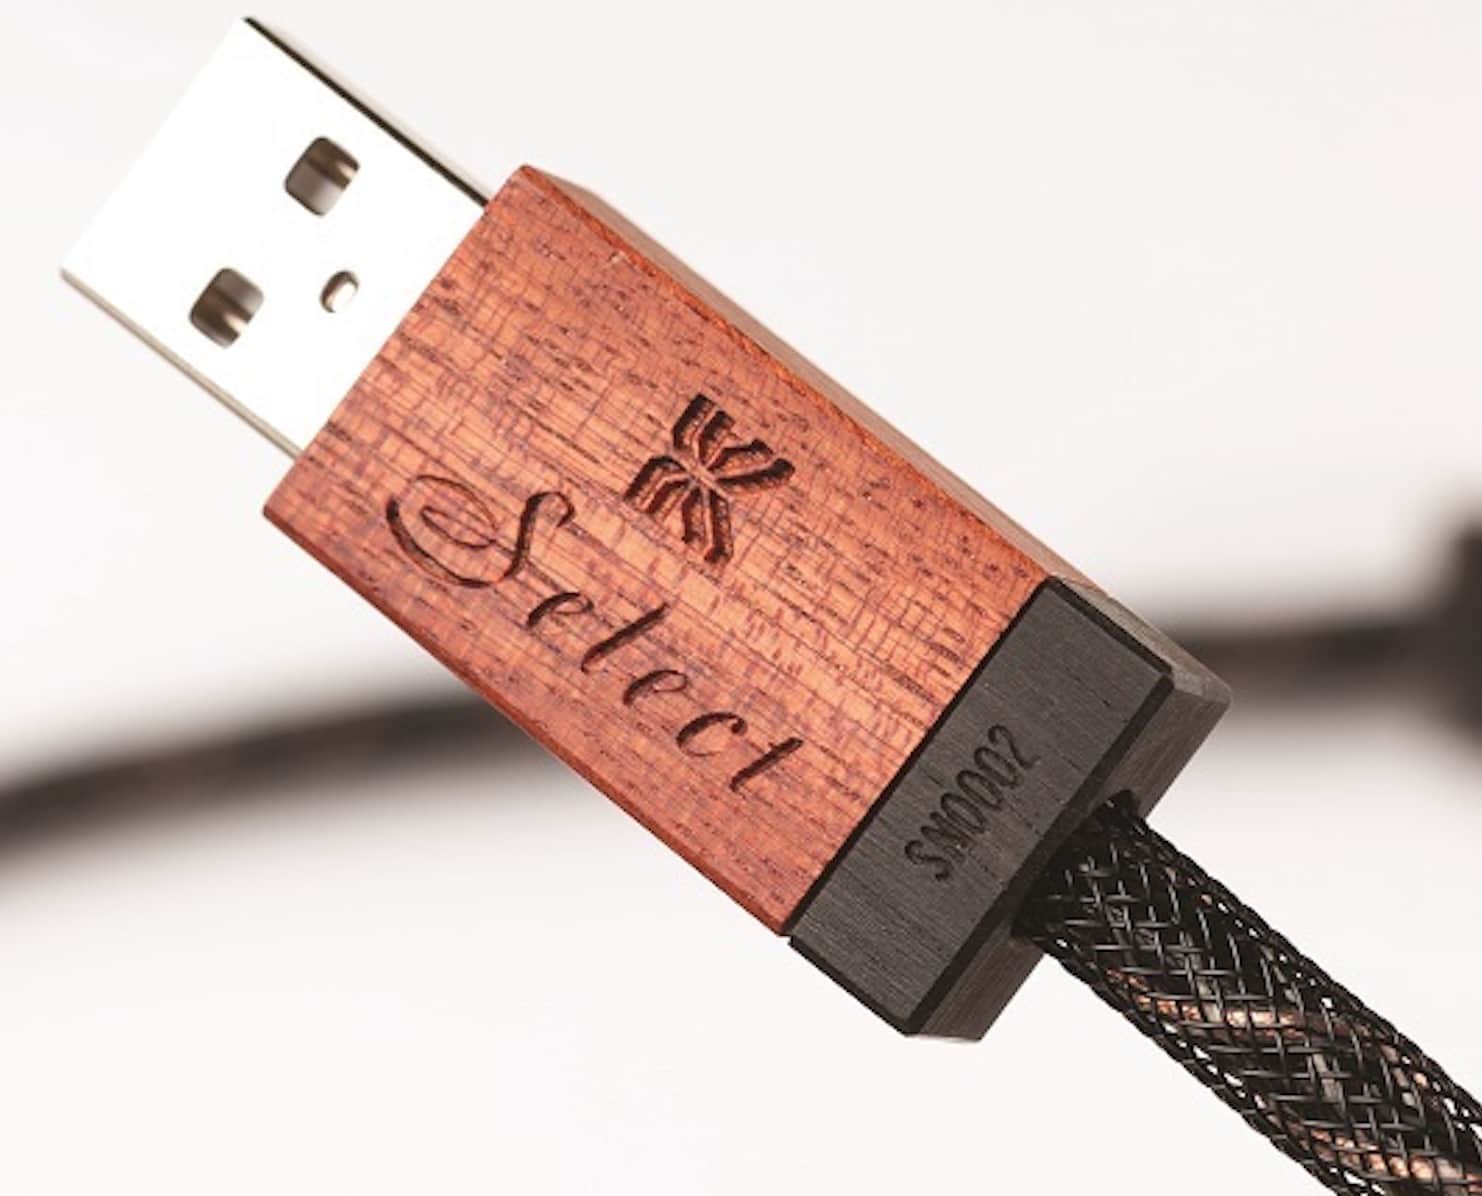 Select USB Cables From Kimber